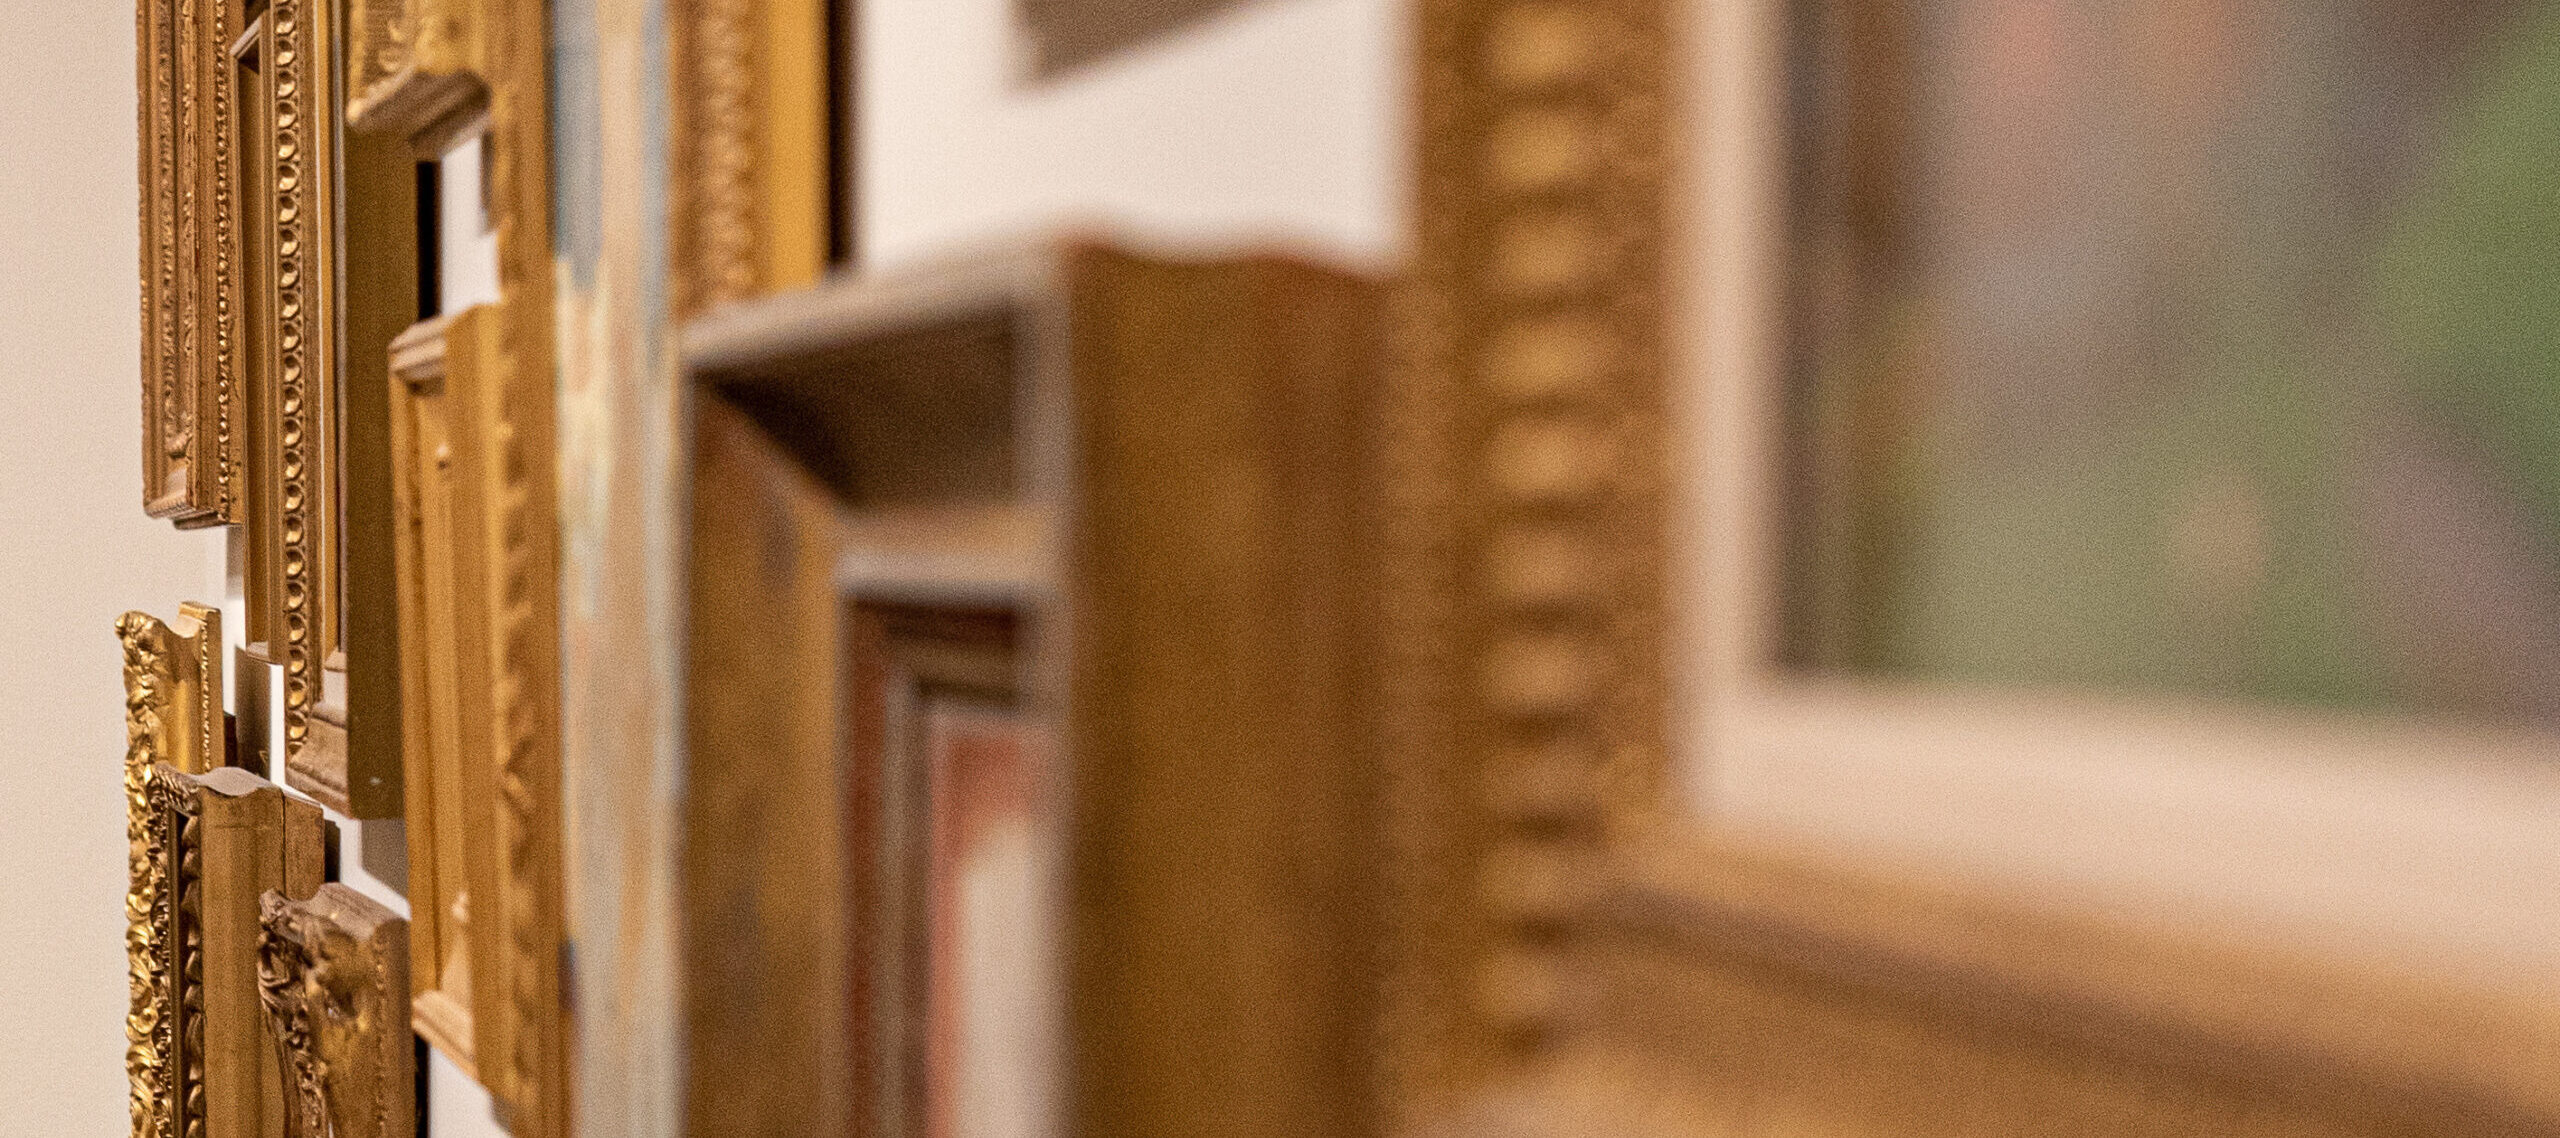 Close up shot of a gallery wall installed salon style, with many small paintings hung closely together.